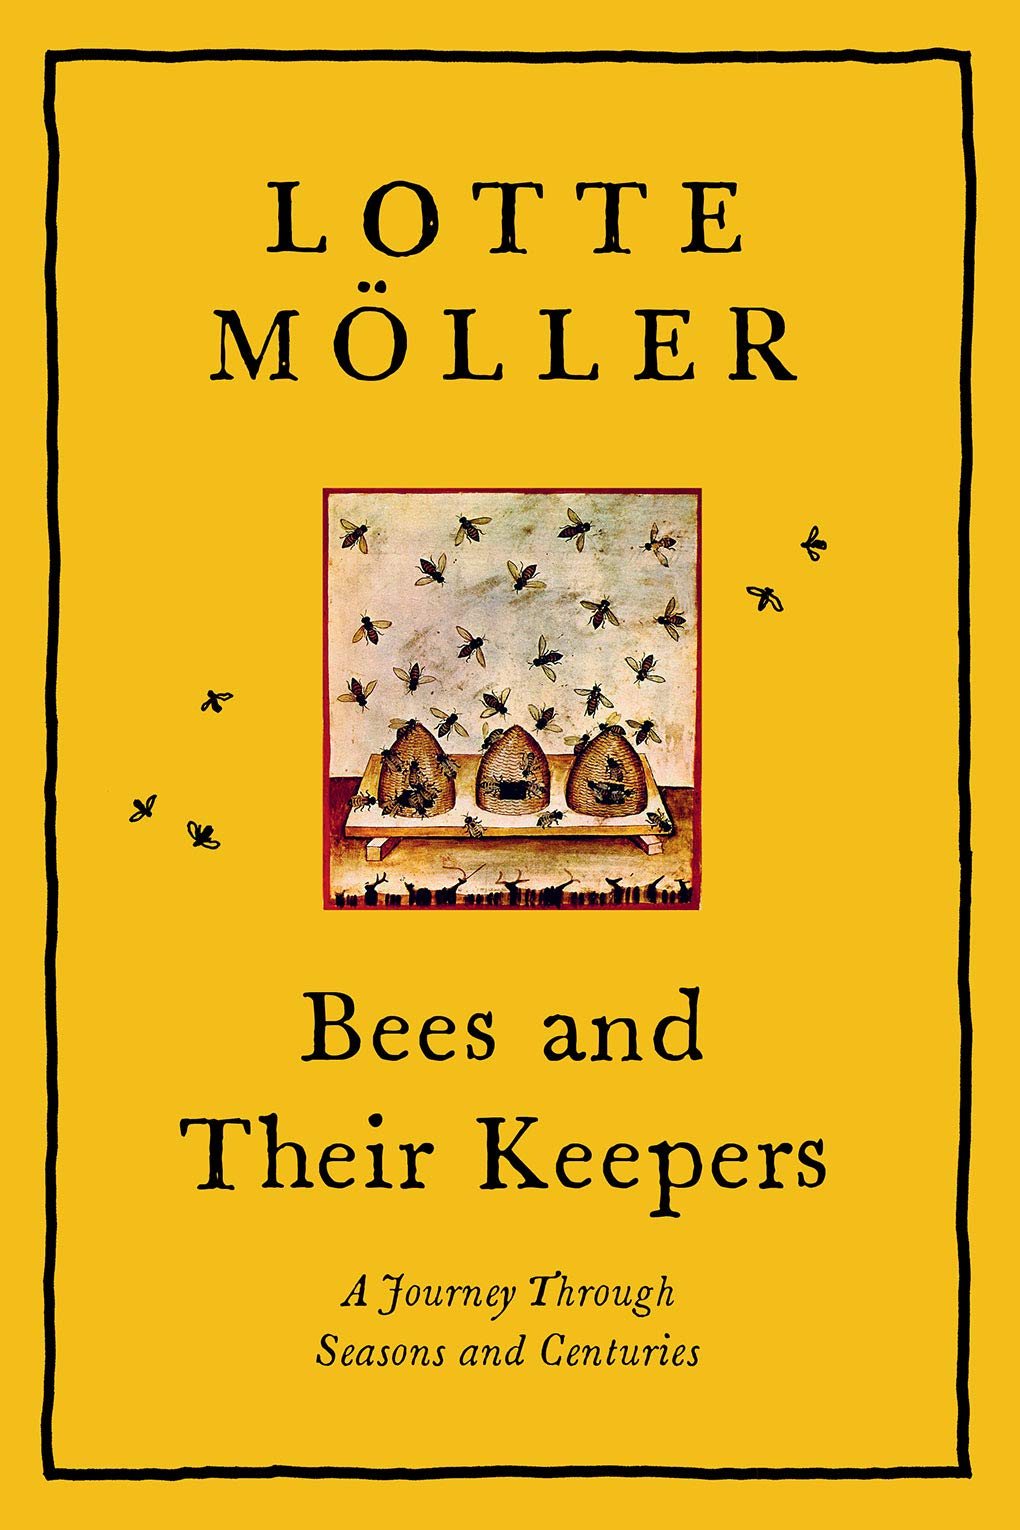 Bees and Their Keepers: A Journey Through Seasons and Centuries (Lotte Möller)